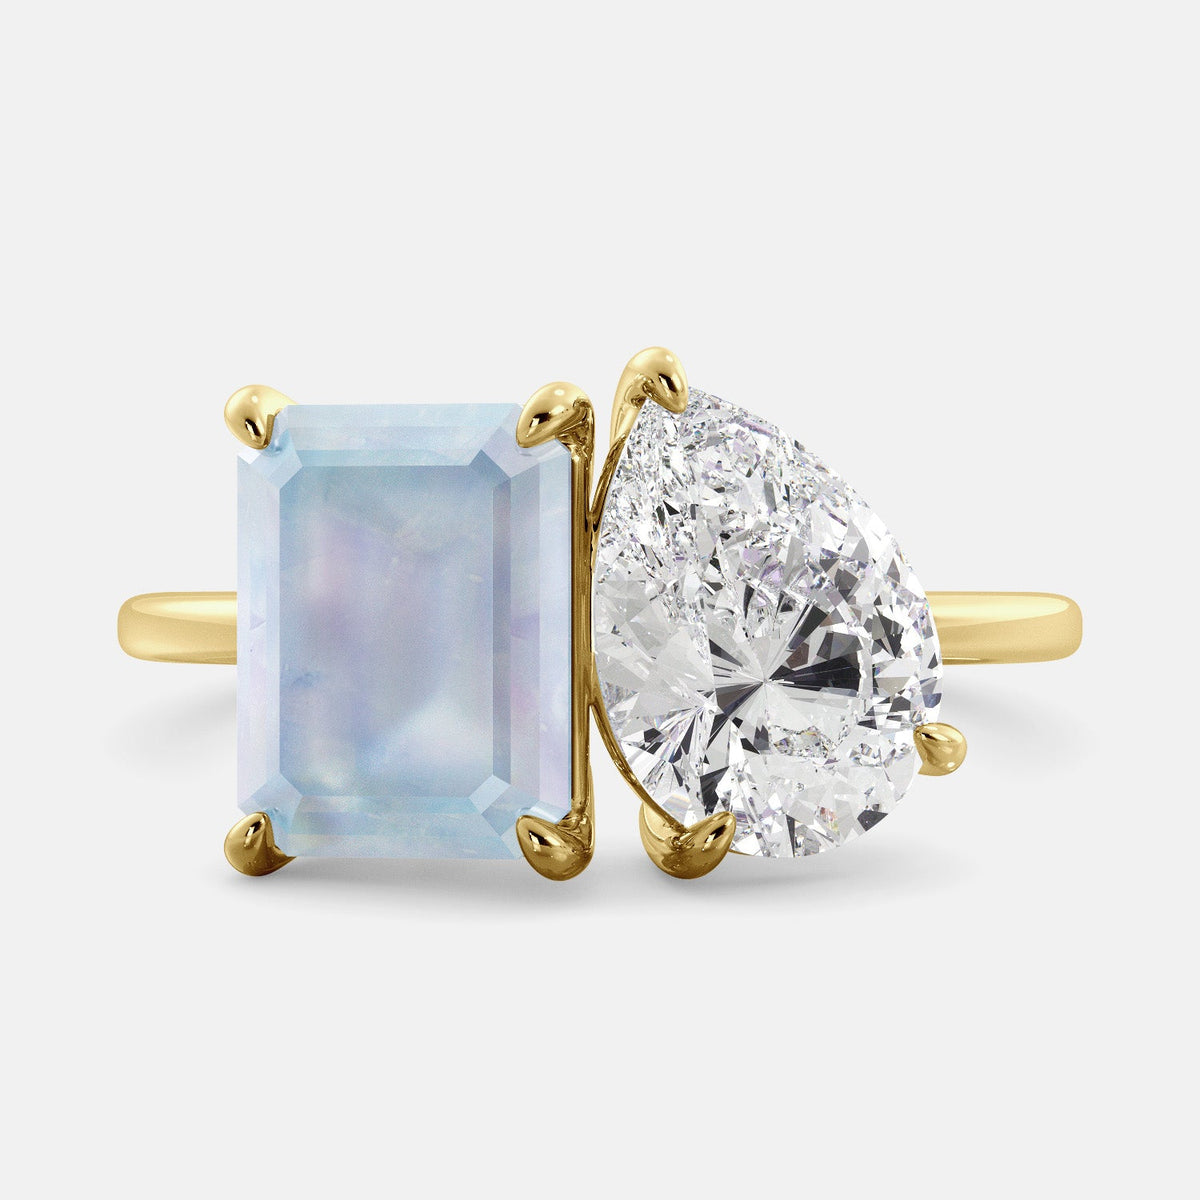 A toi et moi ring with an emerald-cut moonstone and a pear-cut gemstone. The emerald-cut morganite is set on the left of the ring, and the pear-cut gemstone is set on the right. The ring is made of recycled yellow gold and has a simple, elegant design. The pear-cut gemstone can be customized. **Here are some additional details about the image:** * The emerald-cut white moonstone is a birthstone for June. * The pear-cut gemstone can be customized to any stone of your choice.